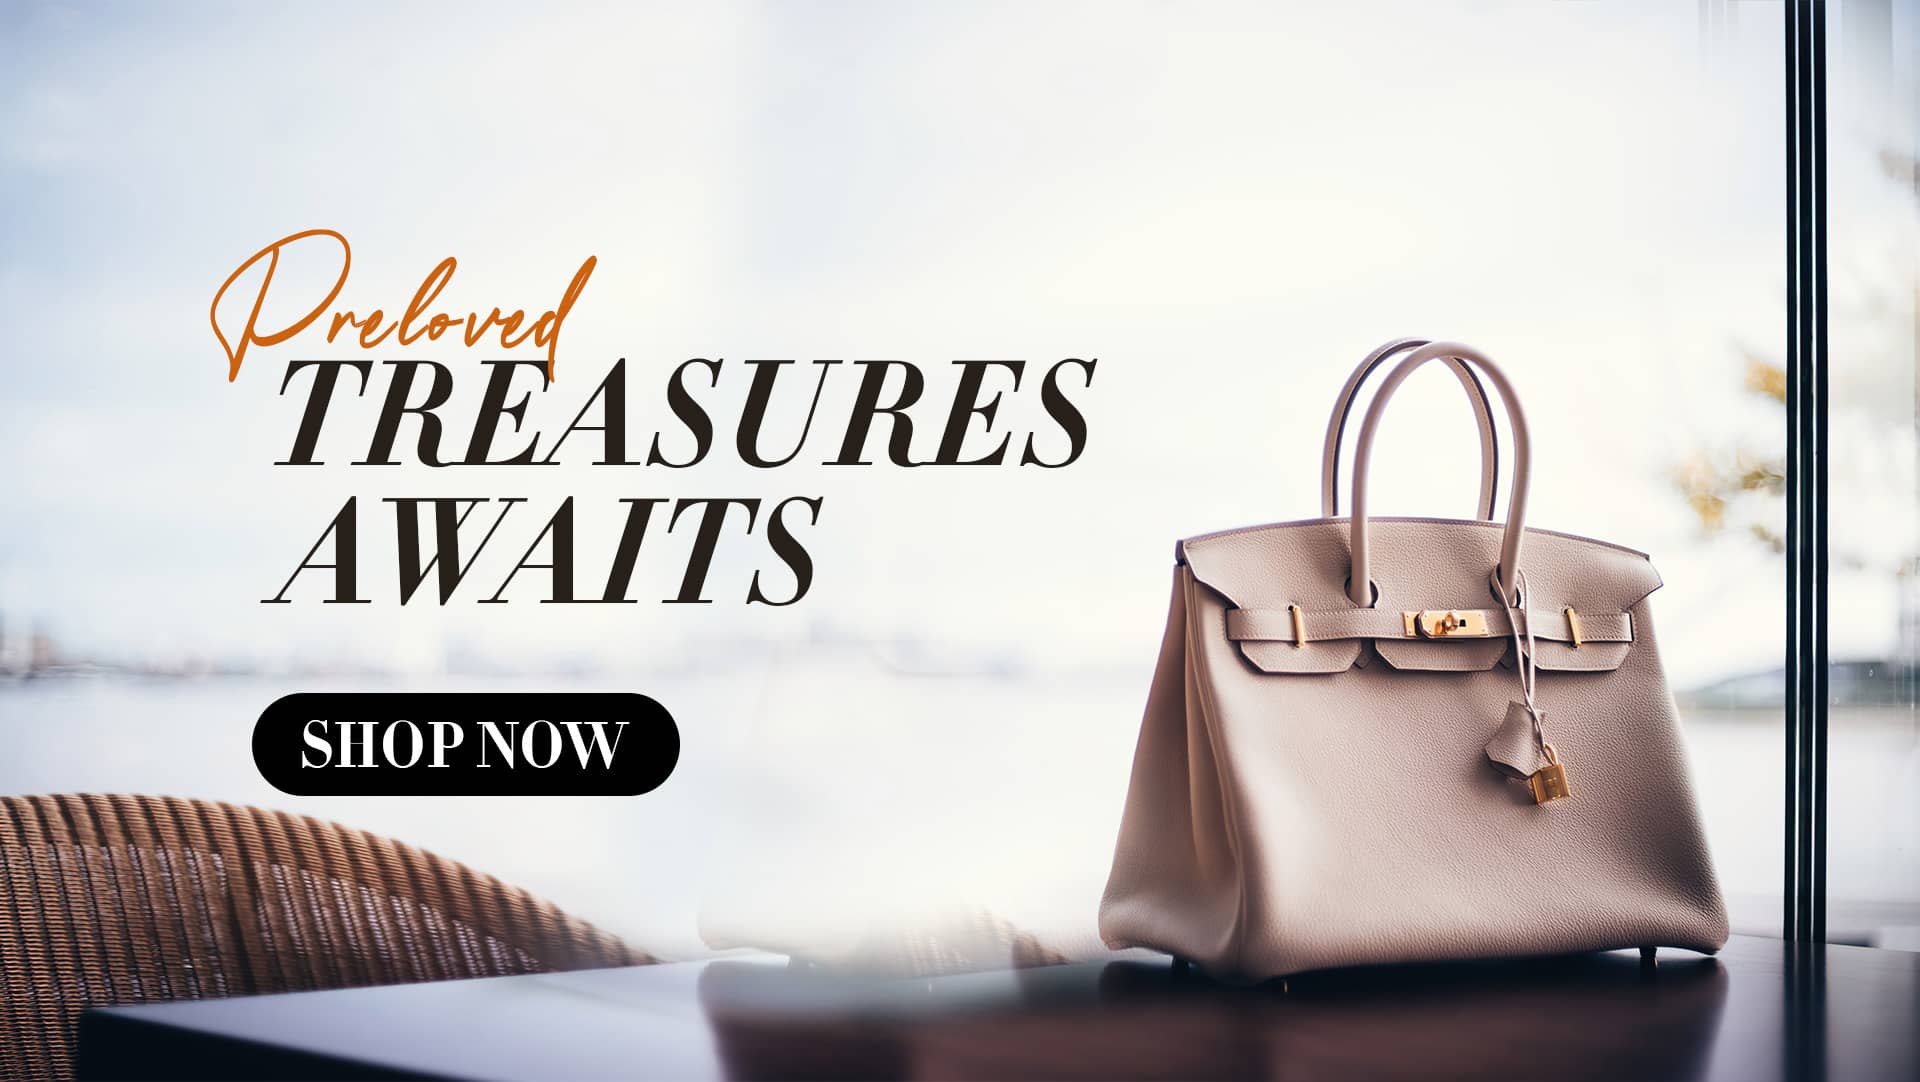 How to Sell Your Pre-Owned Designer Handbag - Watch & Wares